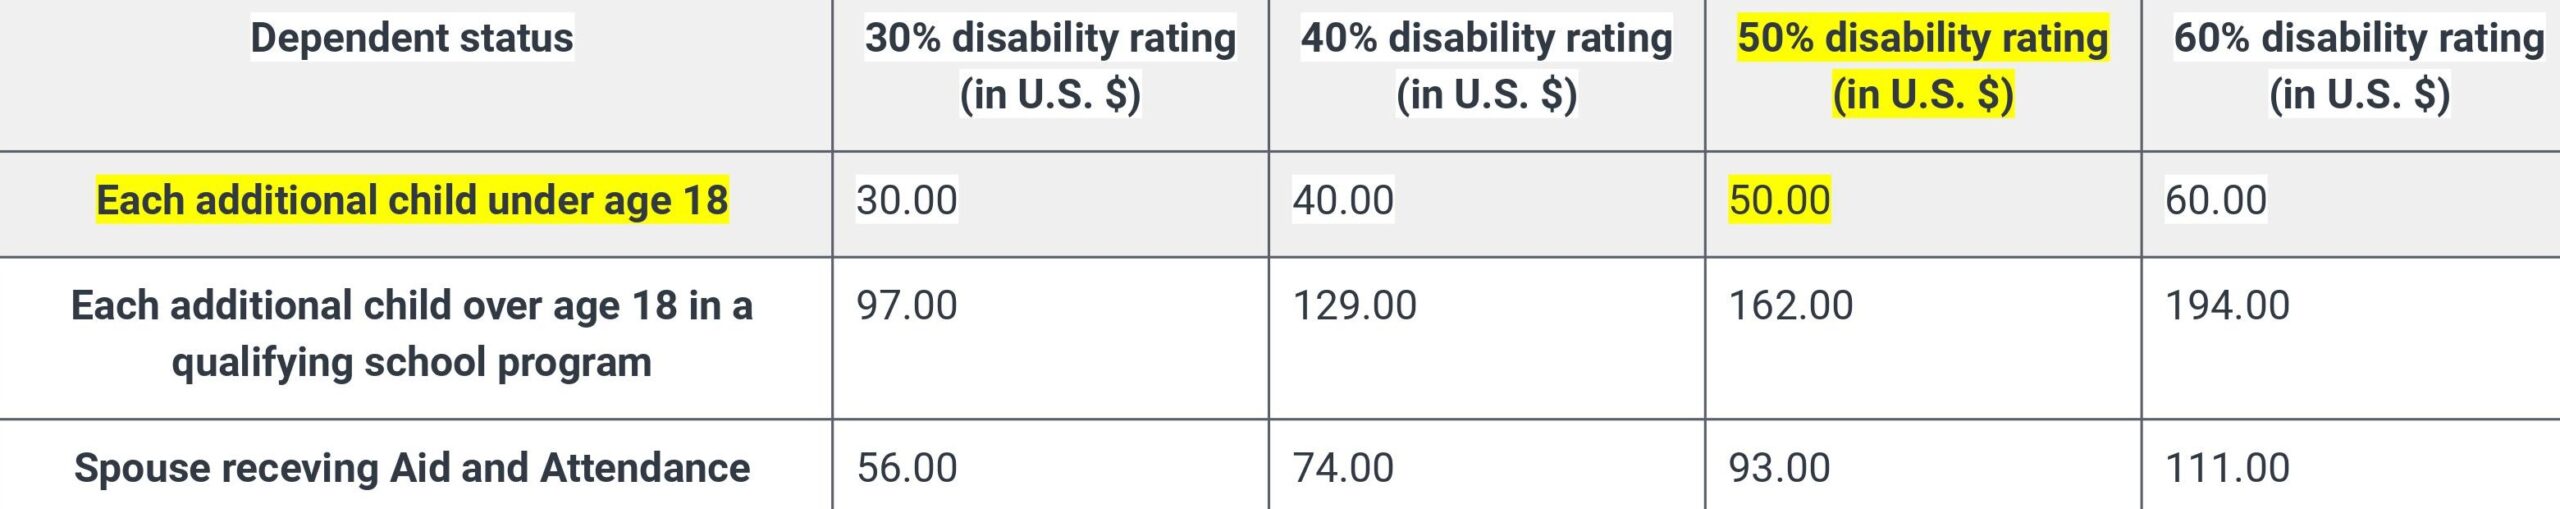 VA Disability Ratings for Post Traumatic Stress Disorder, Explained